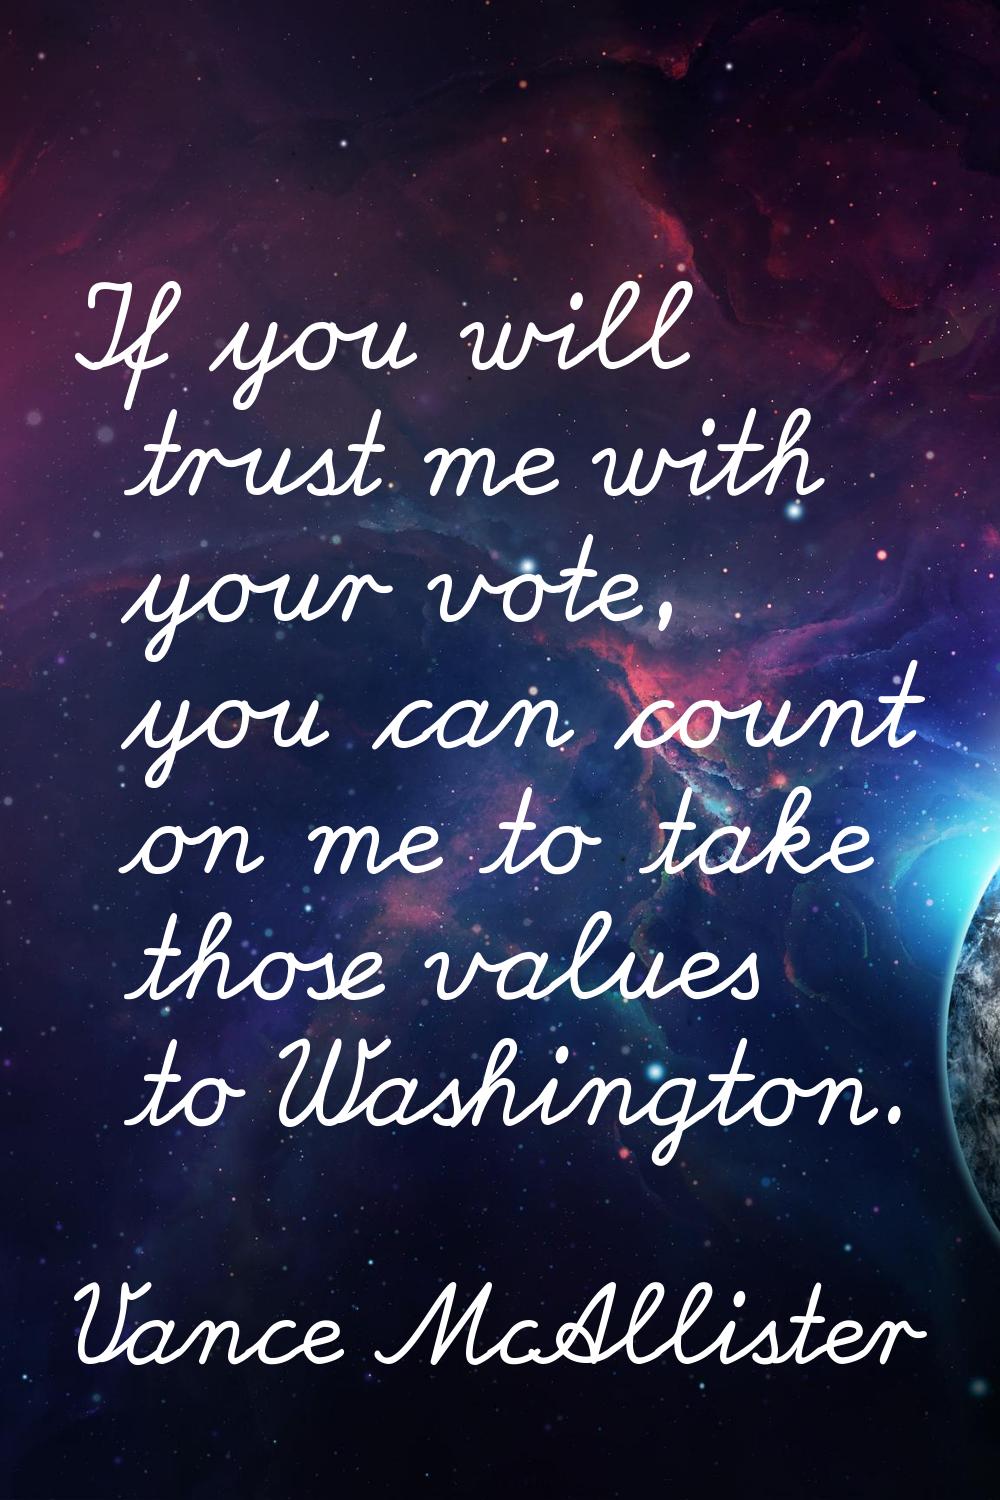 If you will trust me with your vote, you can count on me to take those values to Washington.